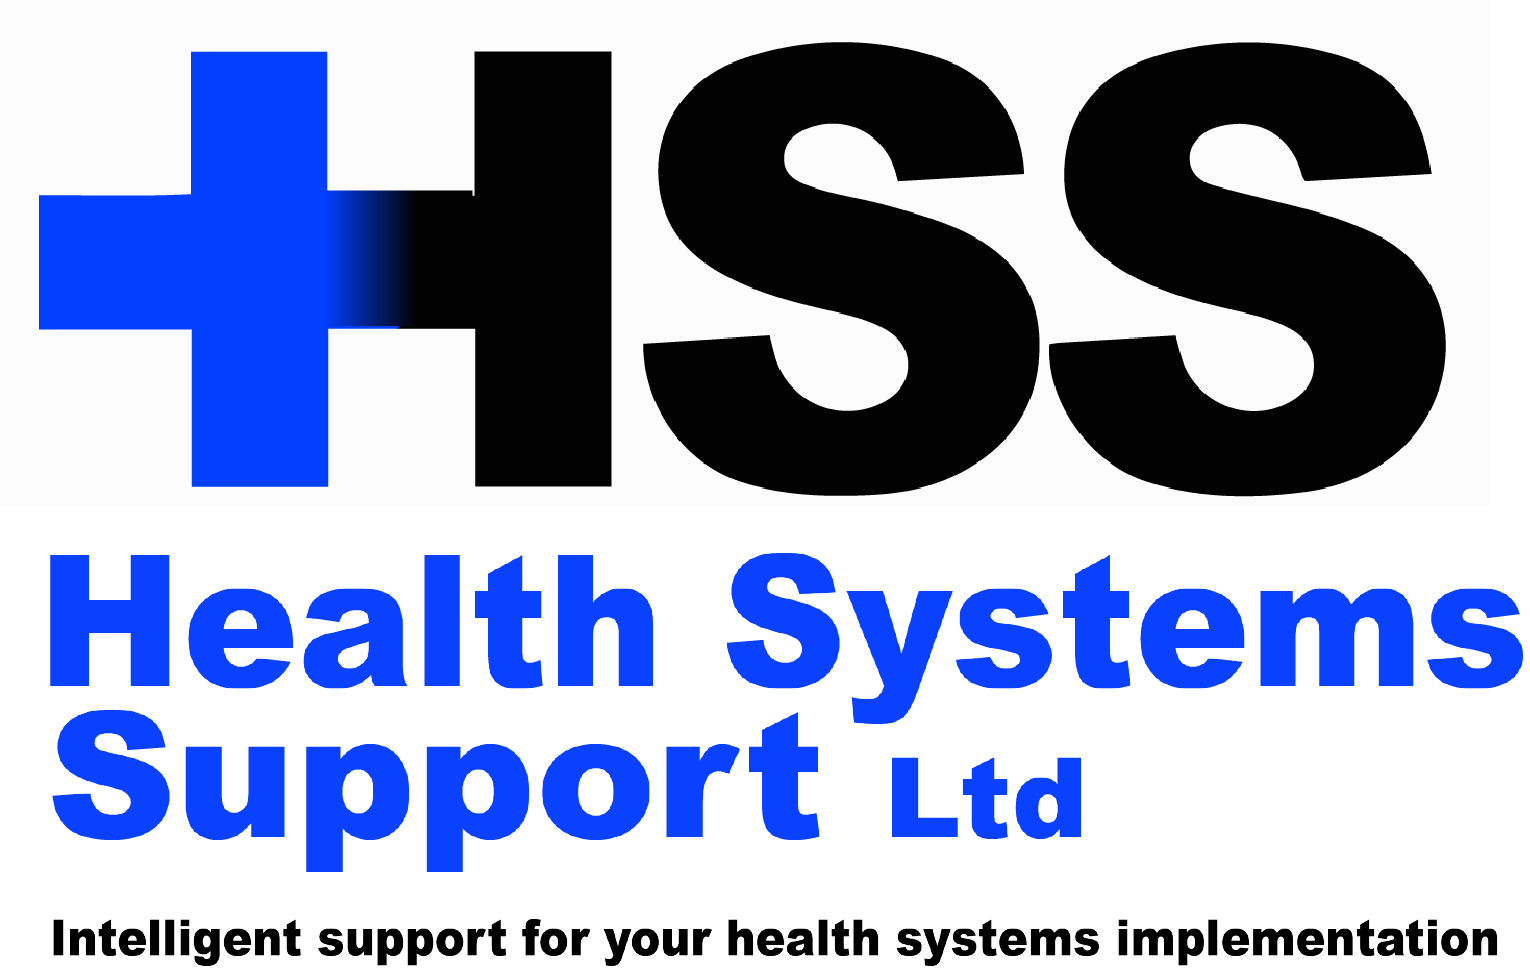 Health Systems Support Ltd